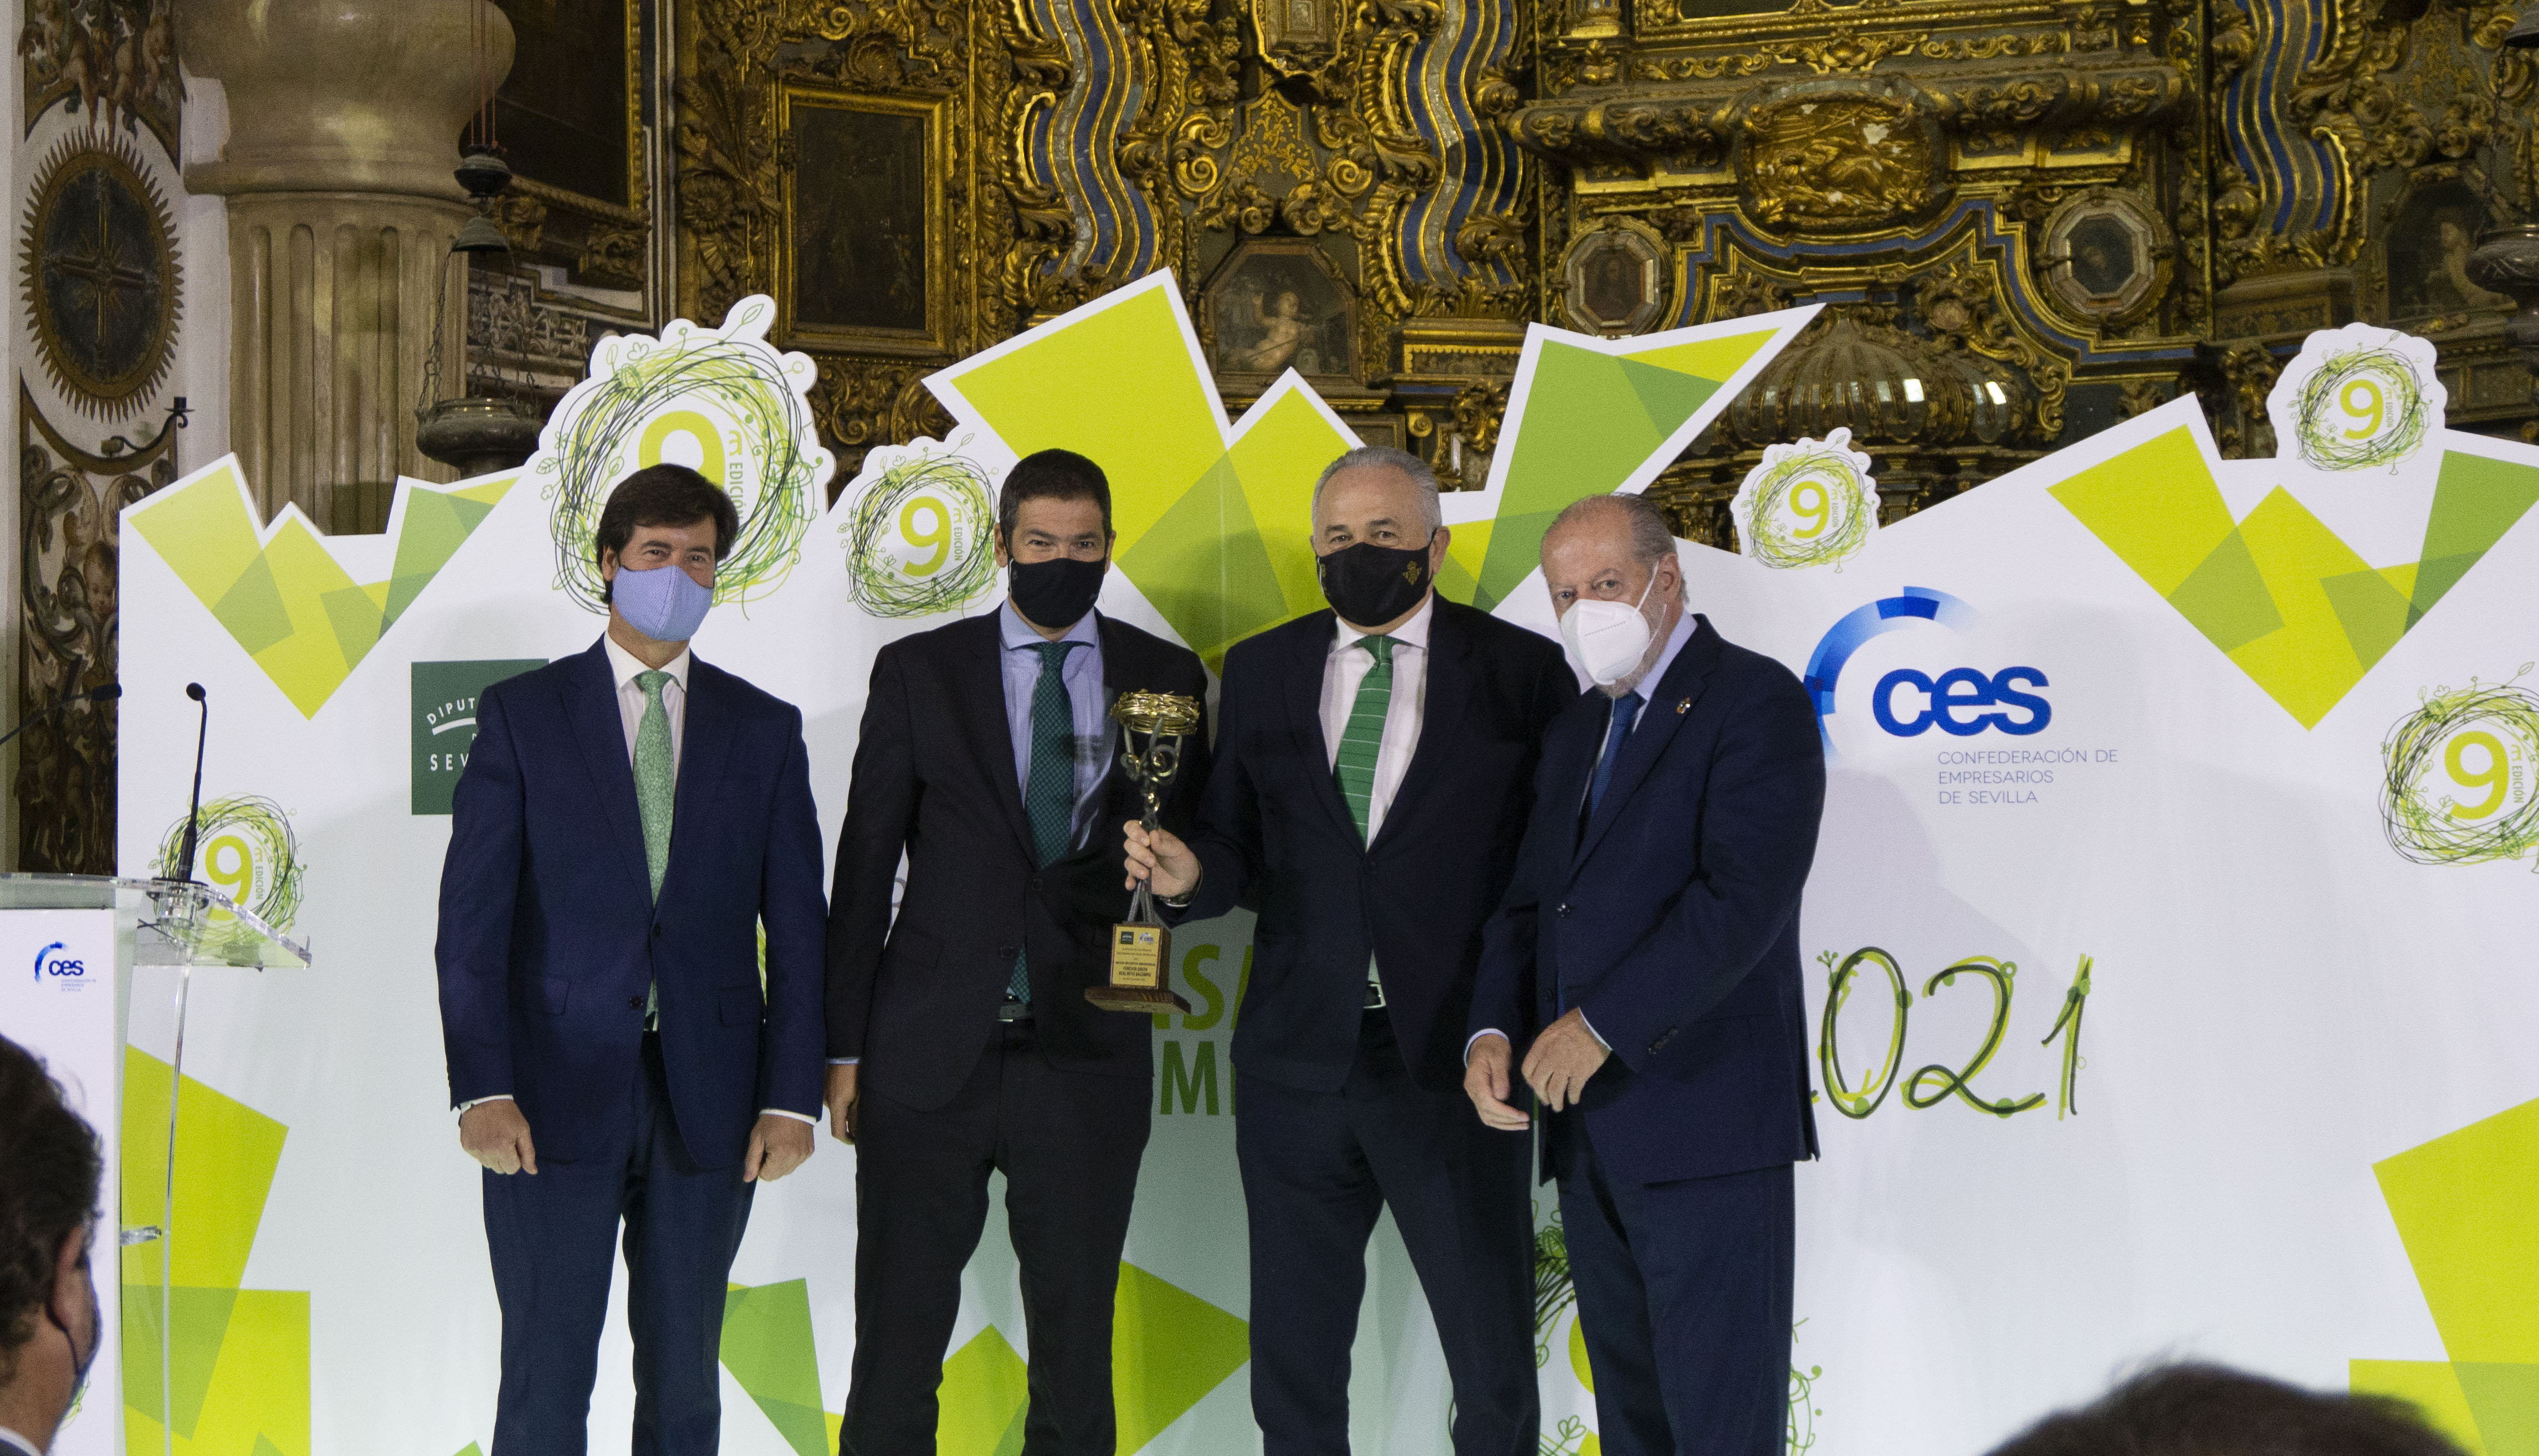 Forever Green receives the award for 